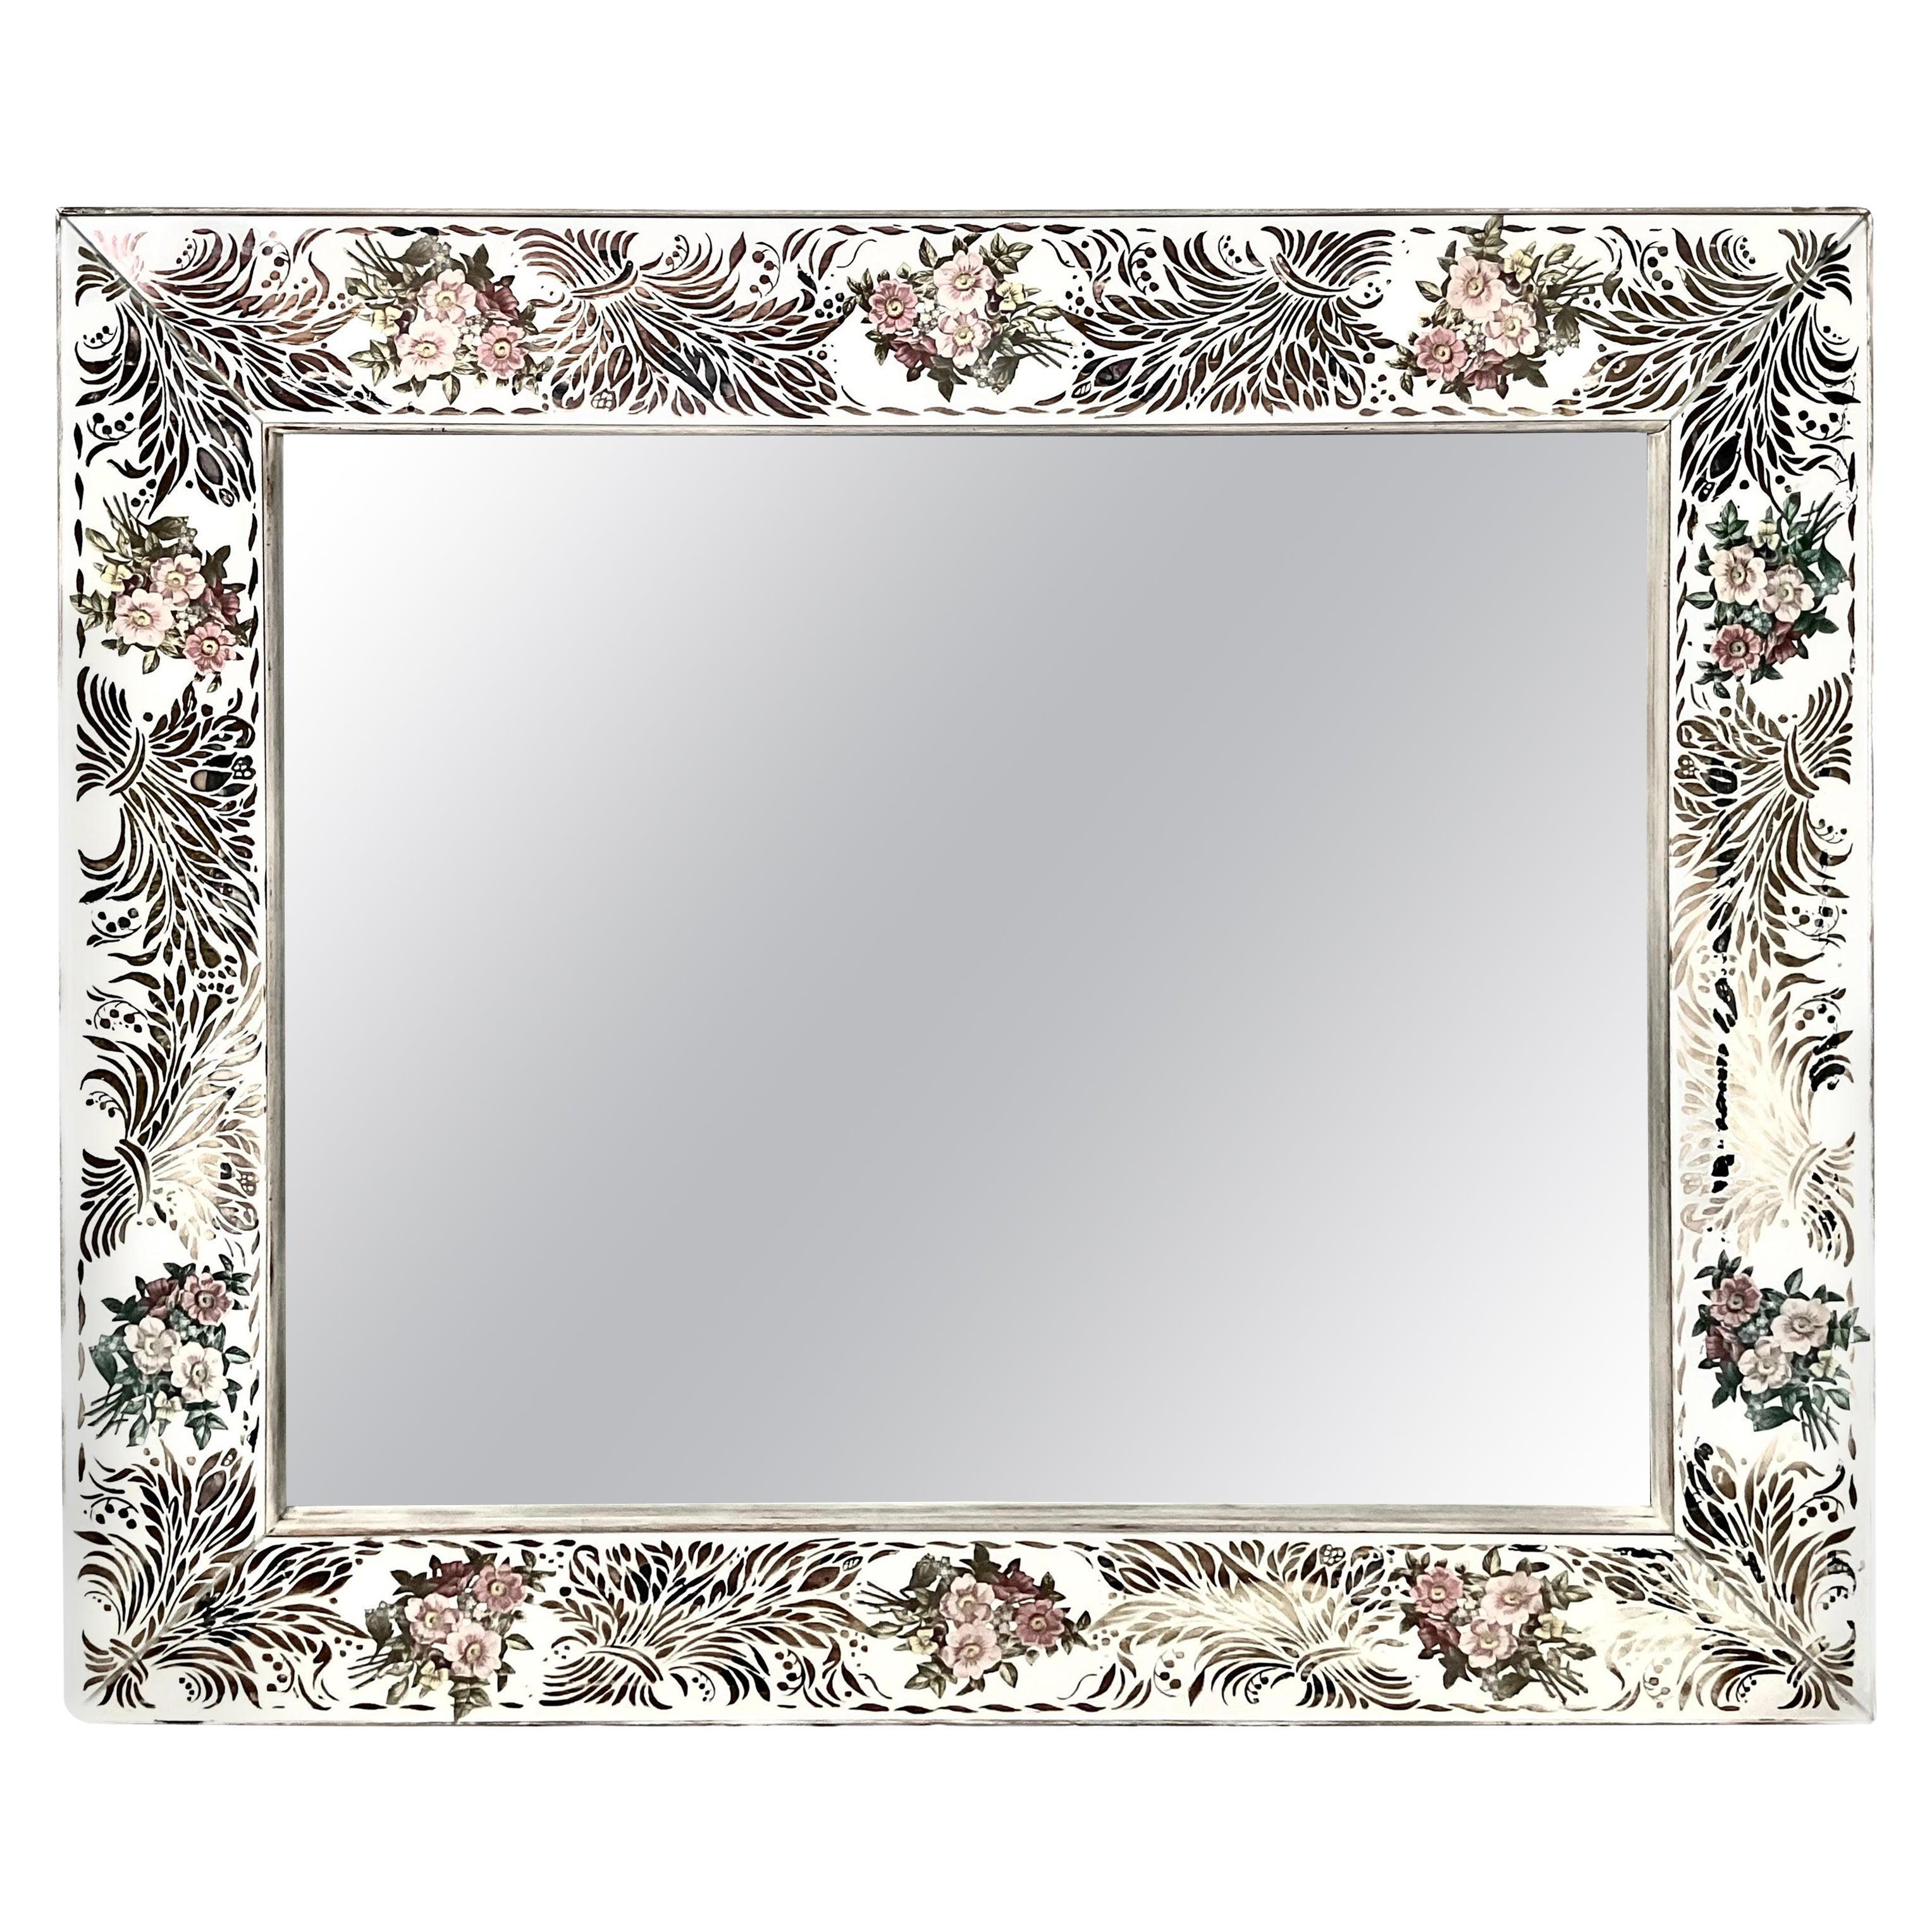 Large French Style Verre Eglomise Gold Leaf Mirror